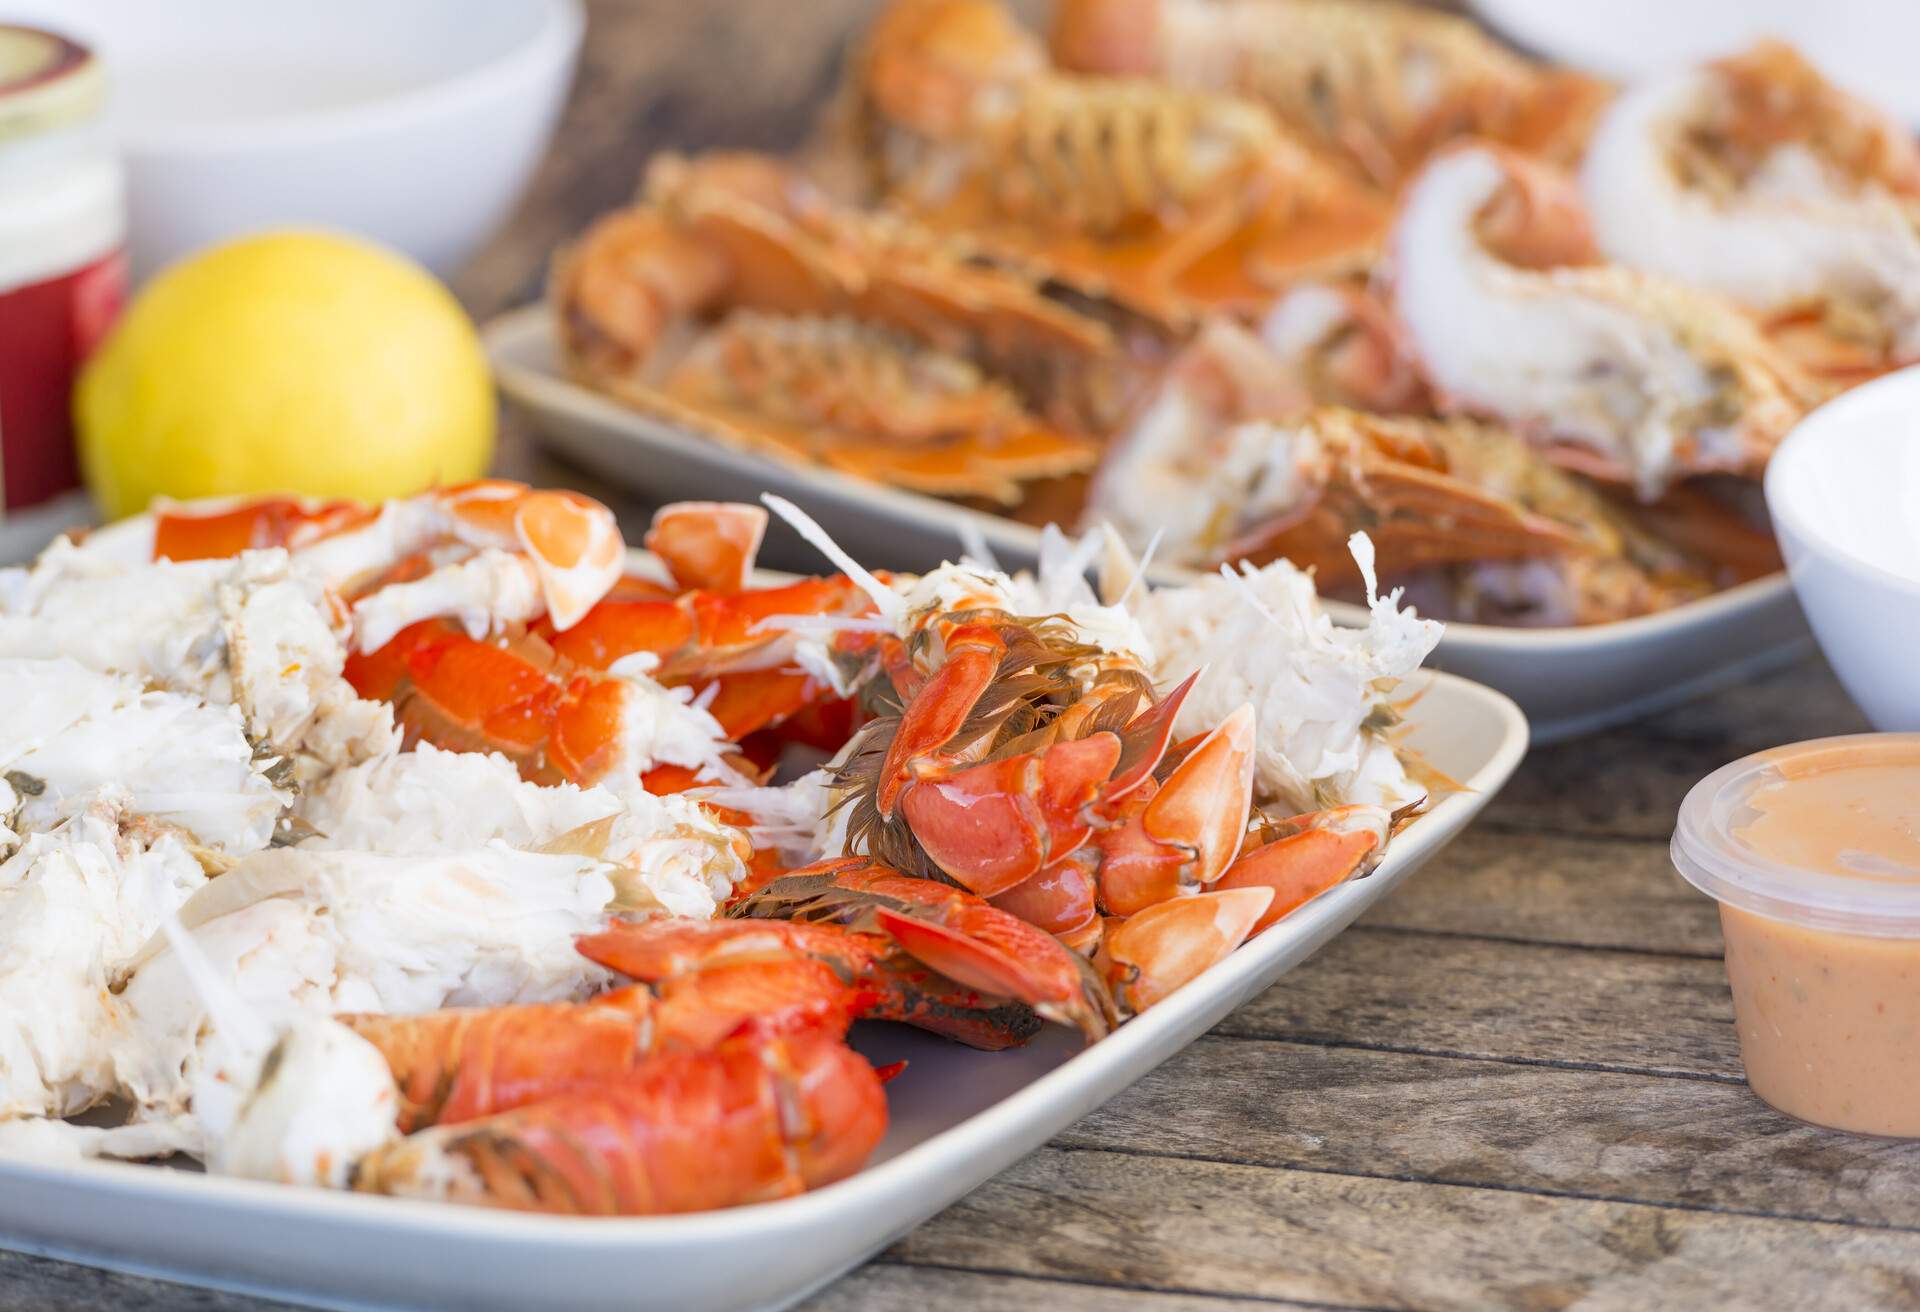 A platter of crab meat with its shells on a wooden table.